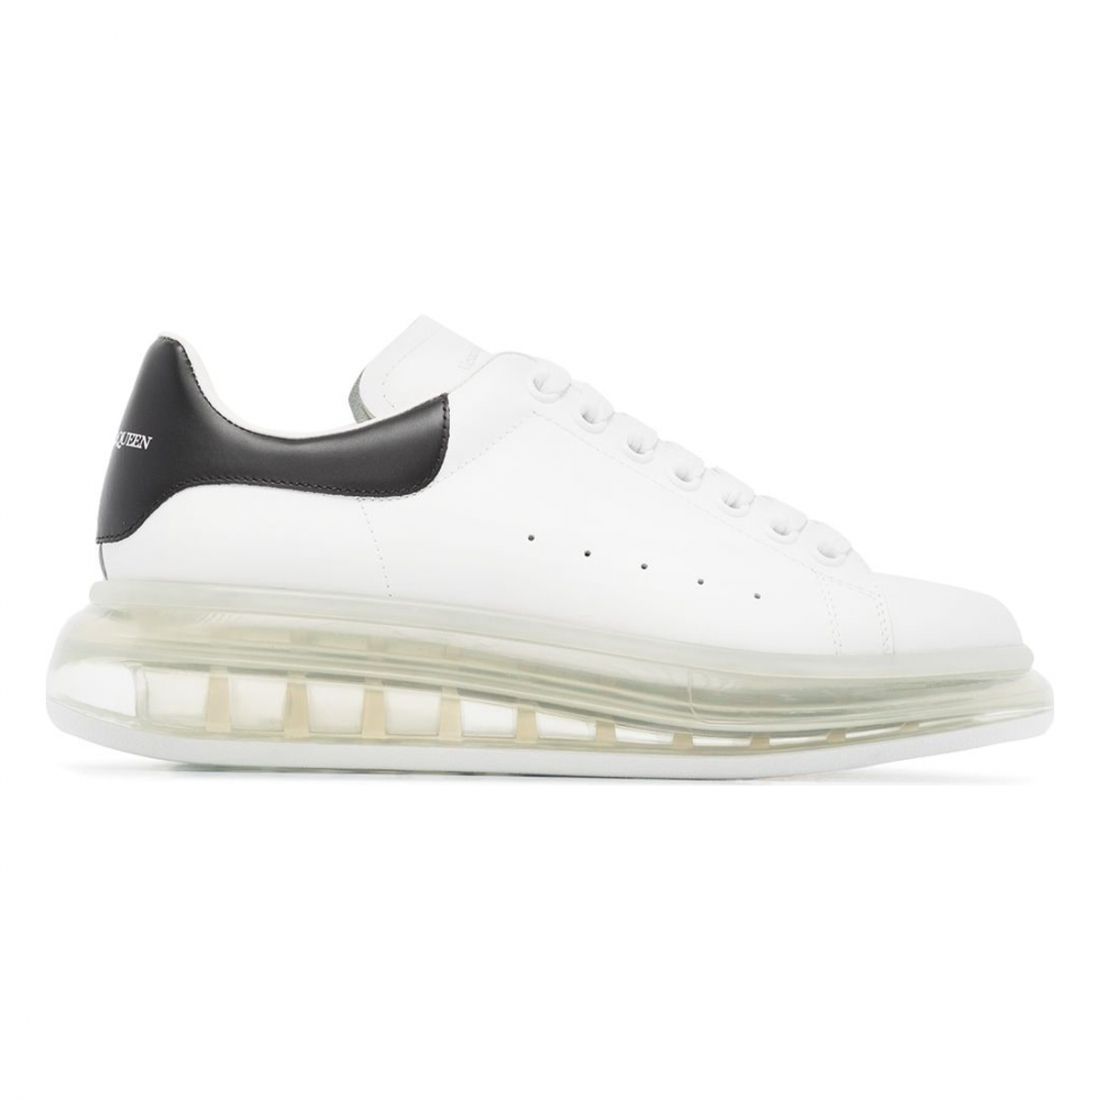 Alexander McQueen - Sneakers 'Oversized Clear' pour Hommes